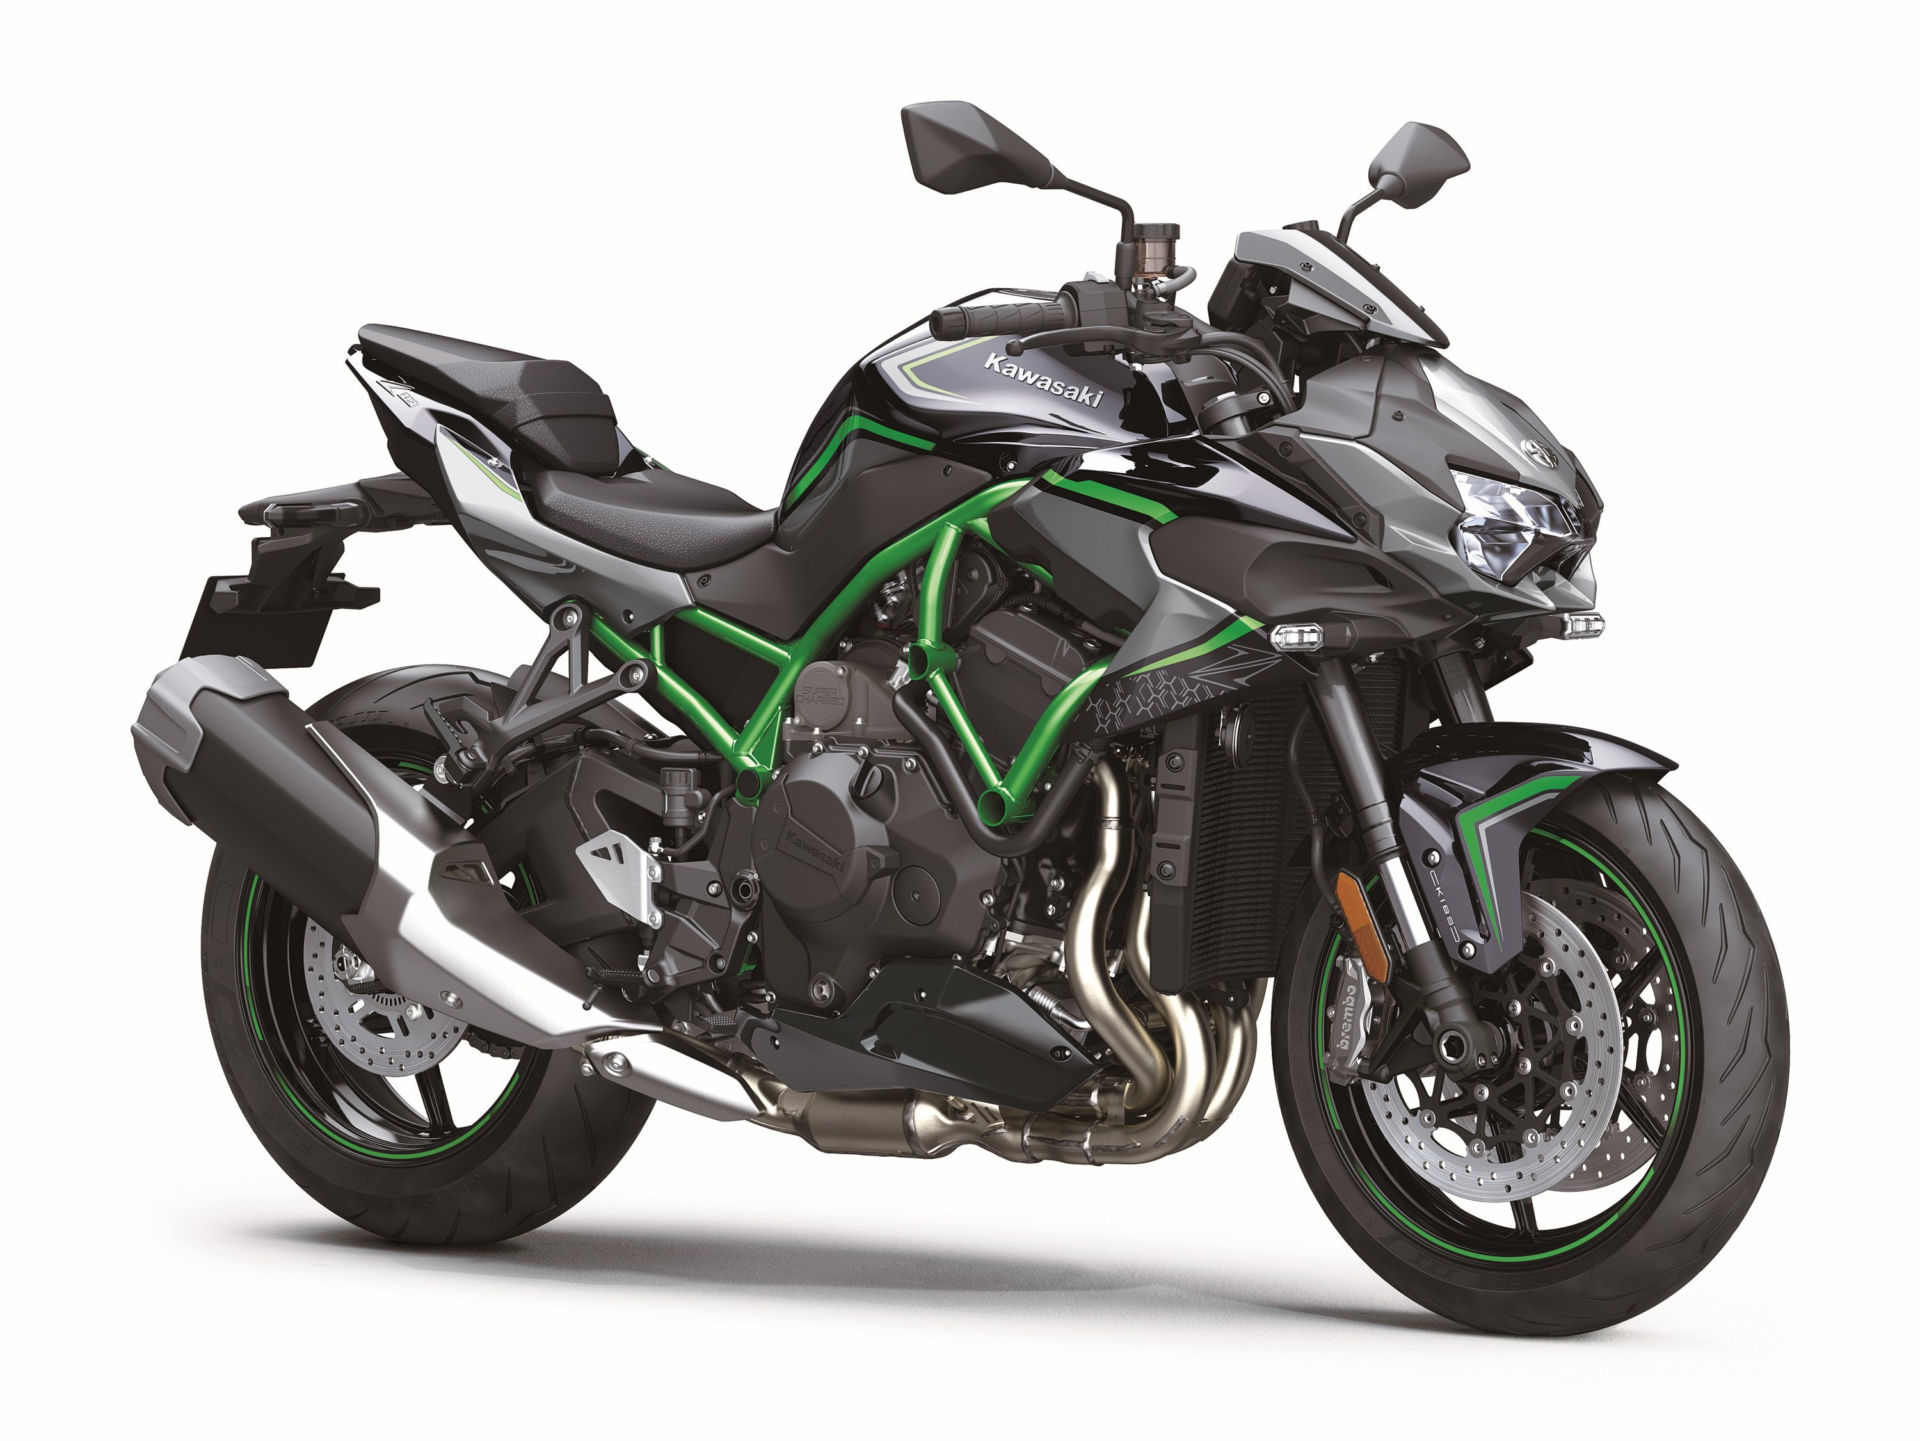 Kawasaki Releases New Supercharged Z H2 Naked Sportbike For 2020